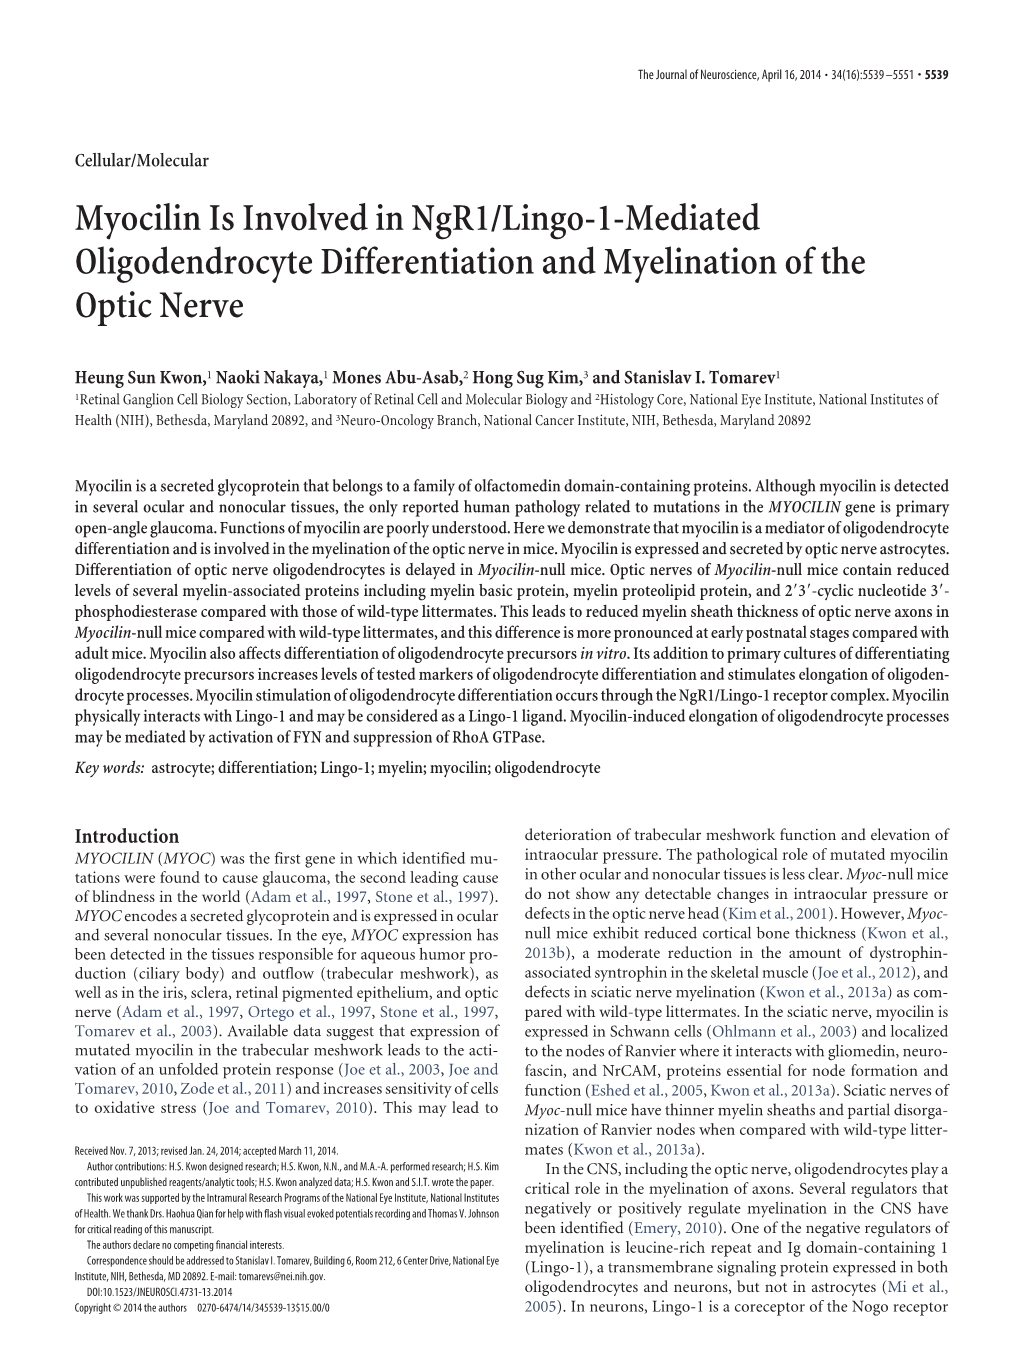 Myocilin Is Involved in Ngr1/Lingo-1-Mediated Oligodendrocyte Differentiation and Myelination of the Optic Nerve